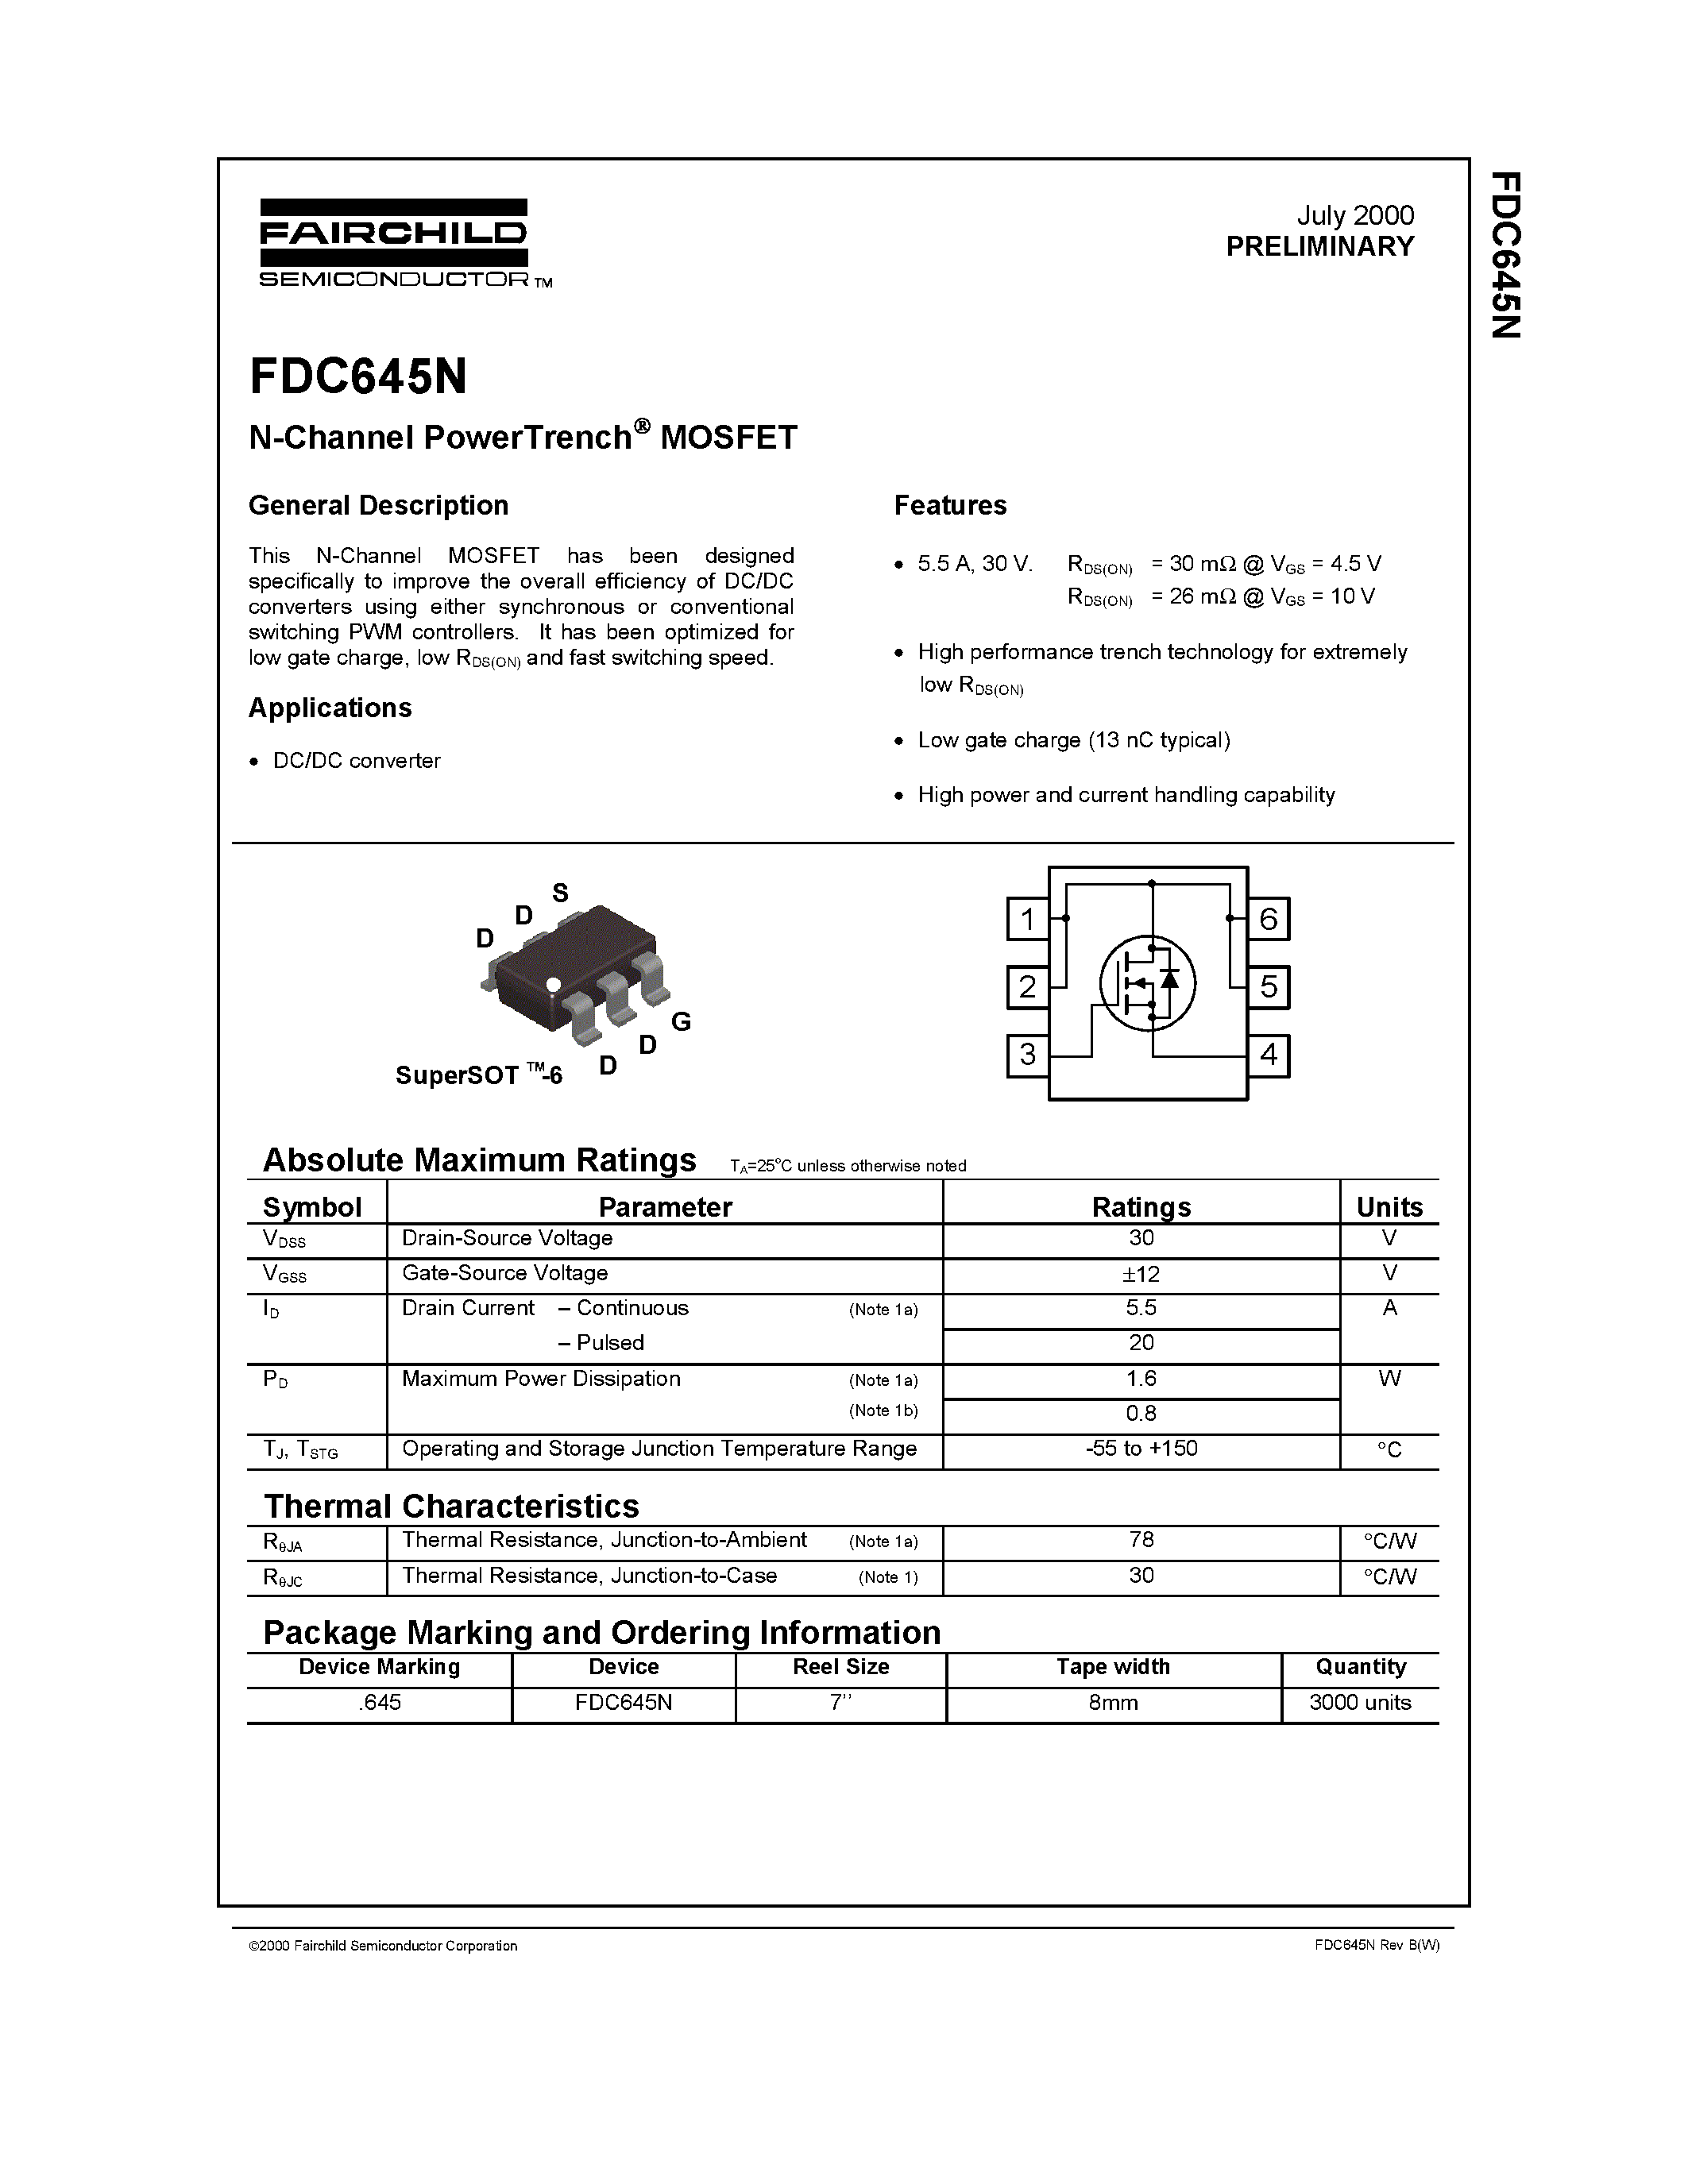 Datasheet FDC645 - N-Channel PowerTrench MOSFET page 1